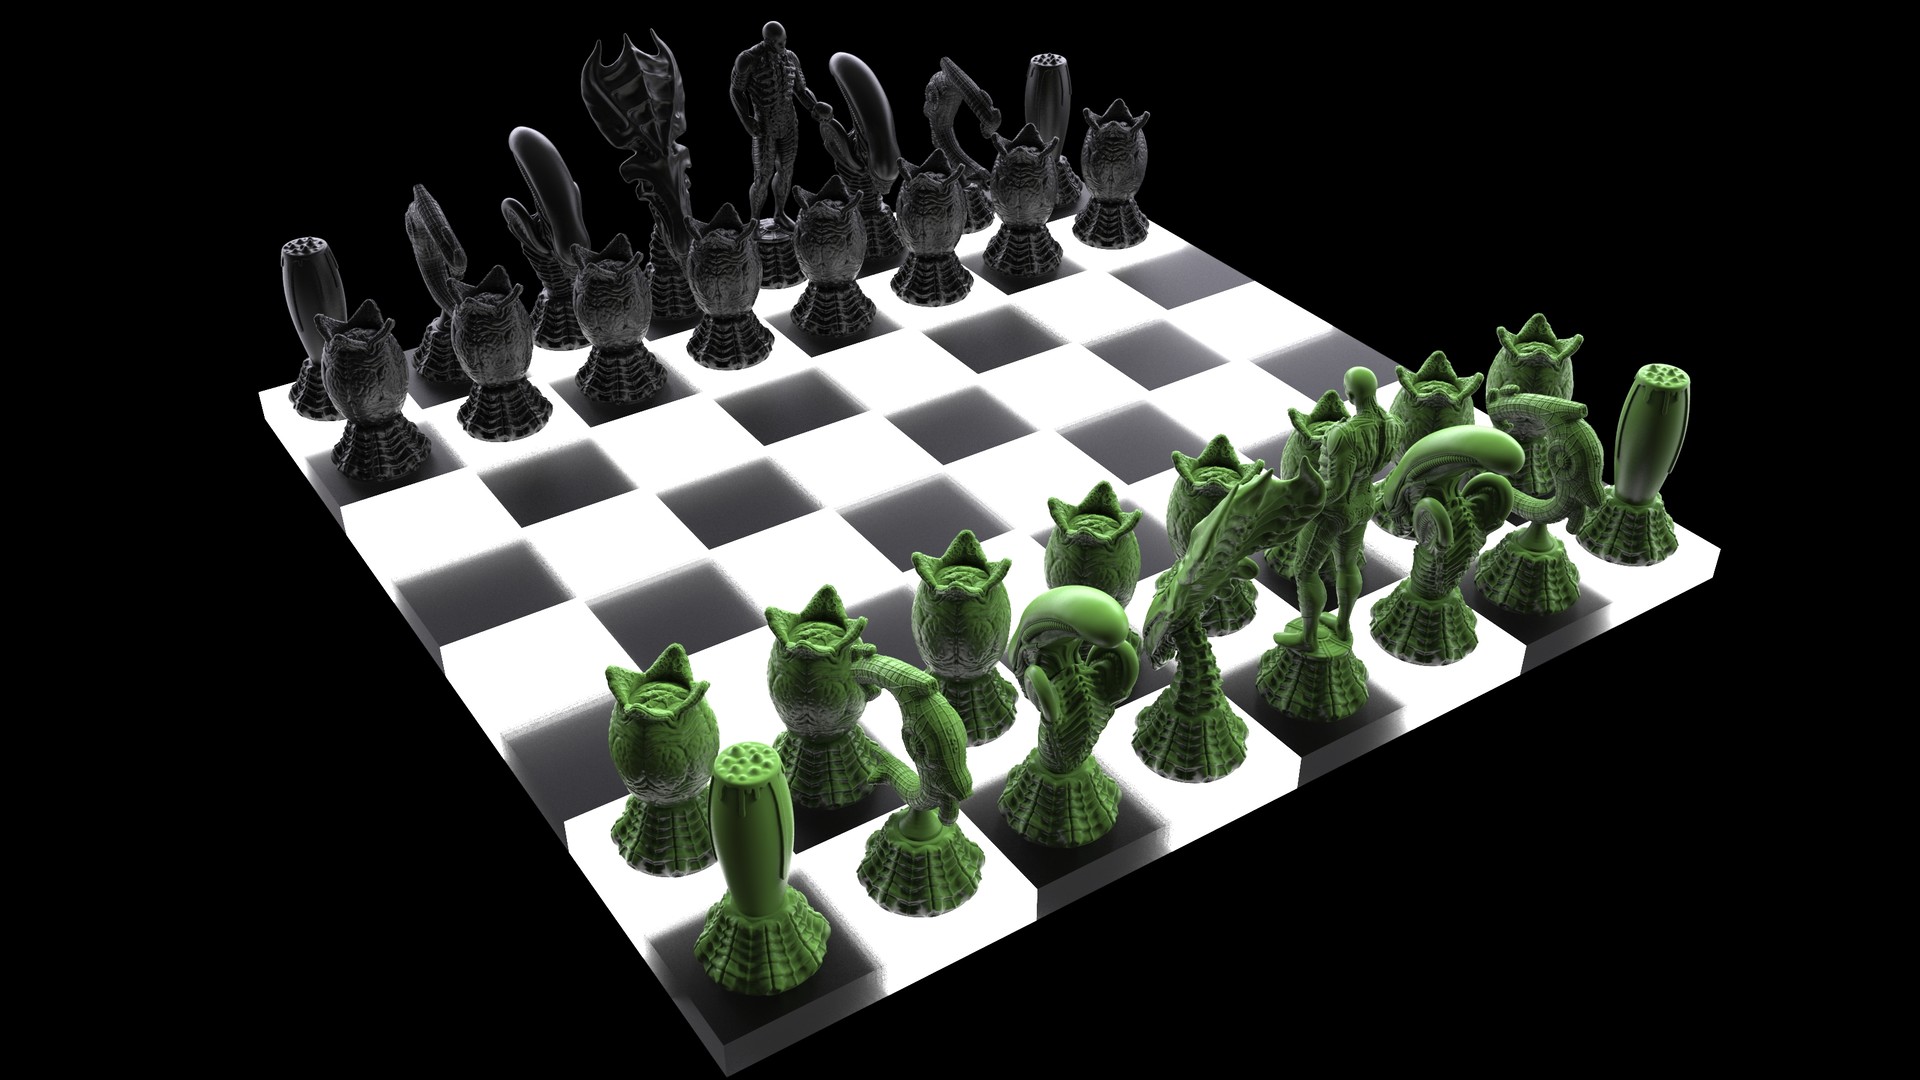 Robot Alien Playing Chess - Lichess Down Image Art Print for Sale by  GambitChess